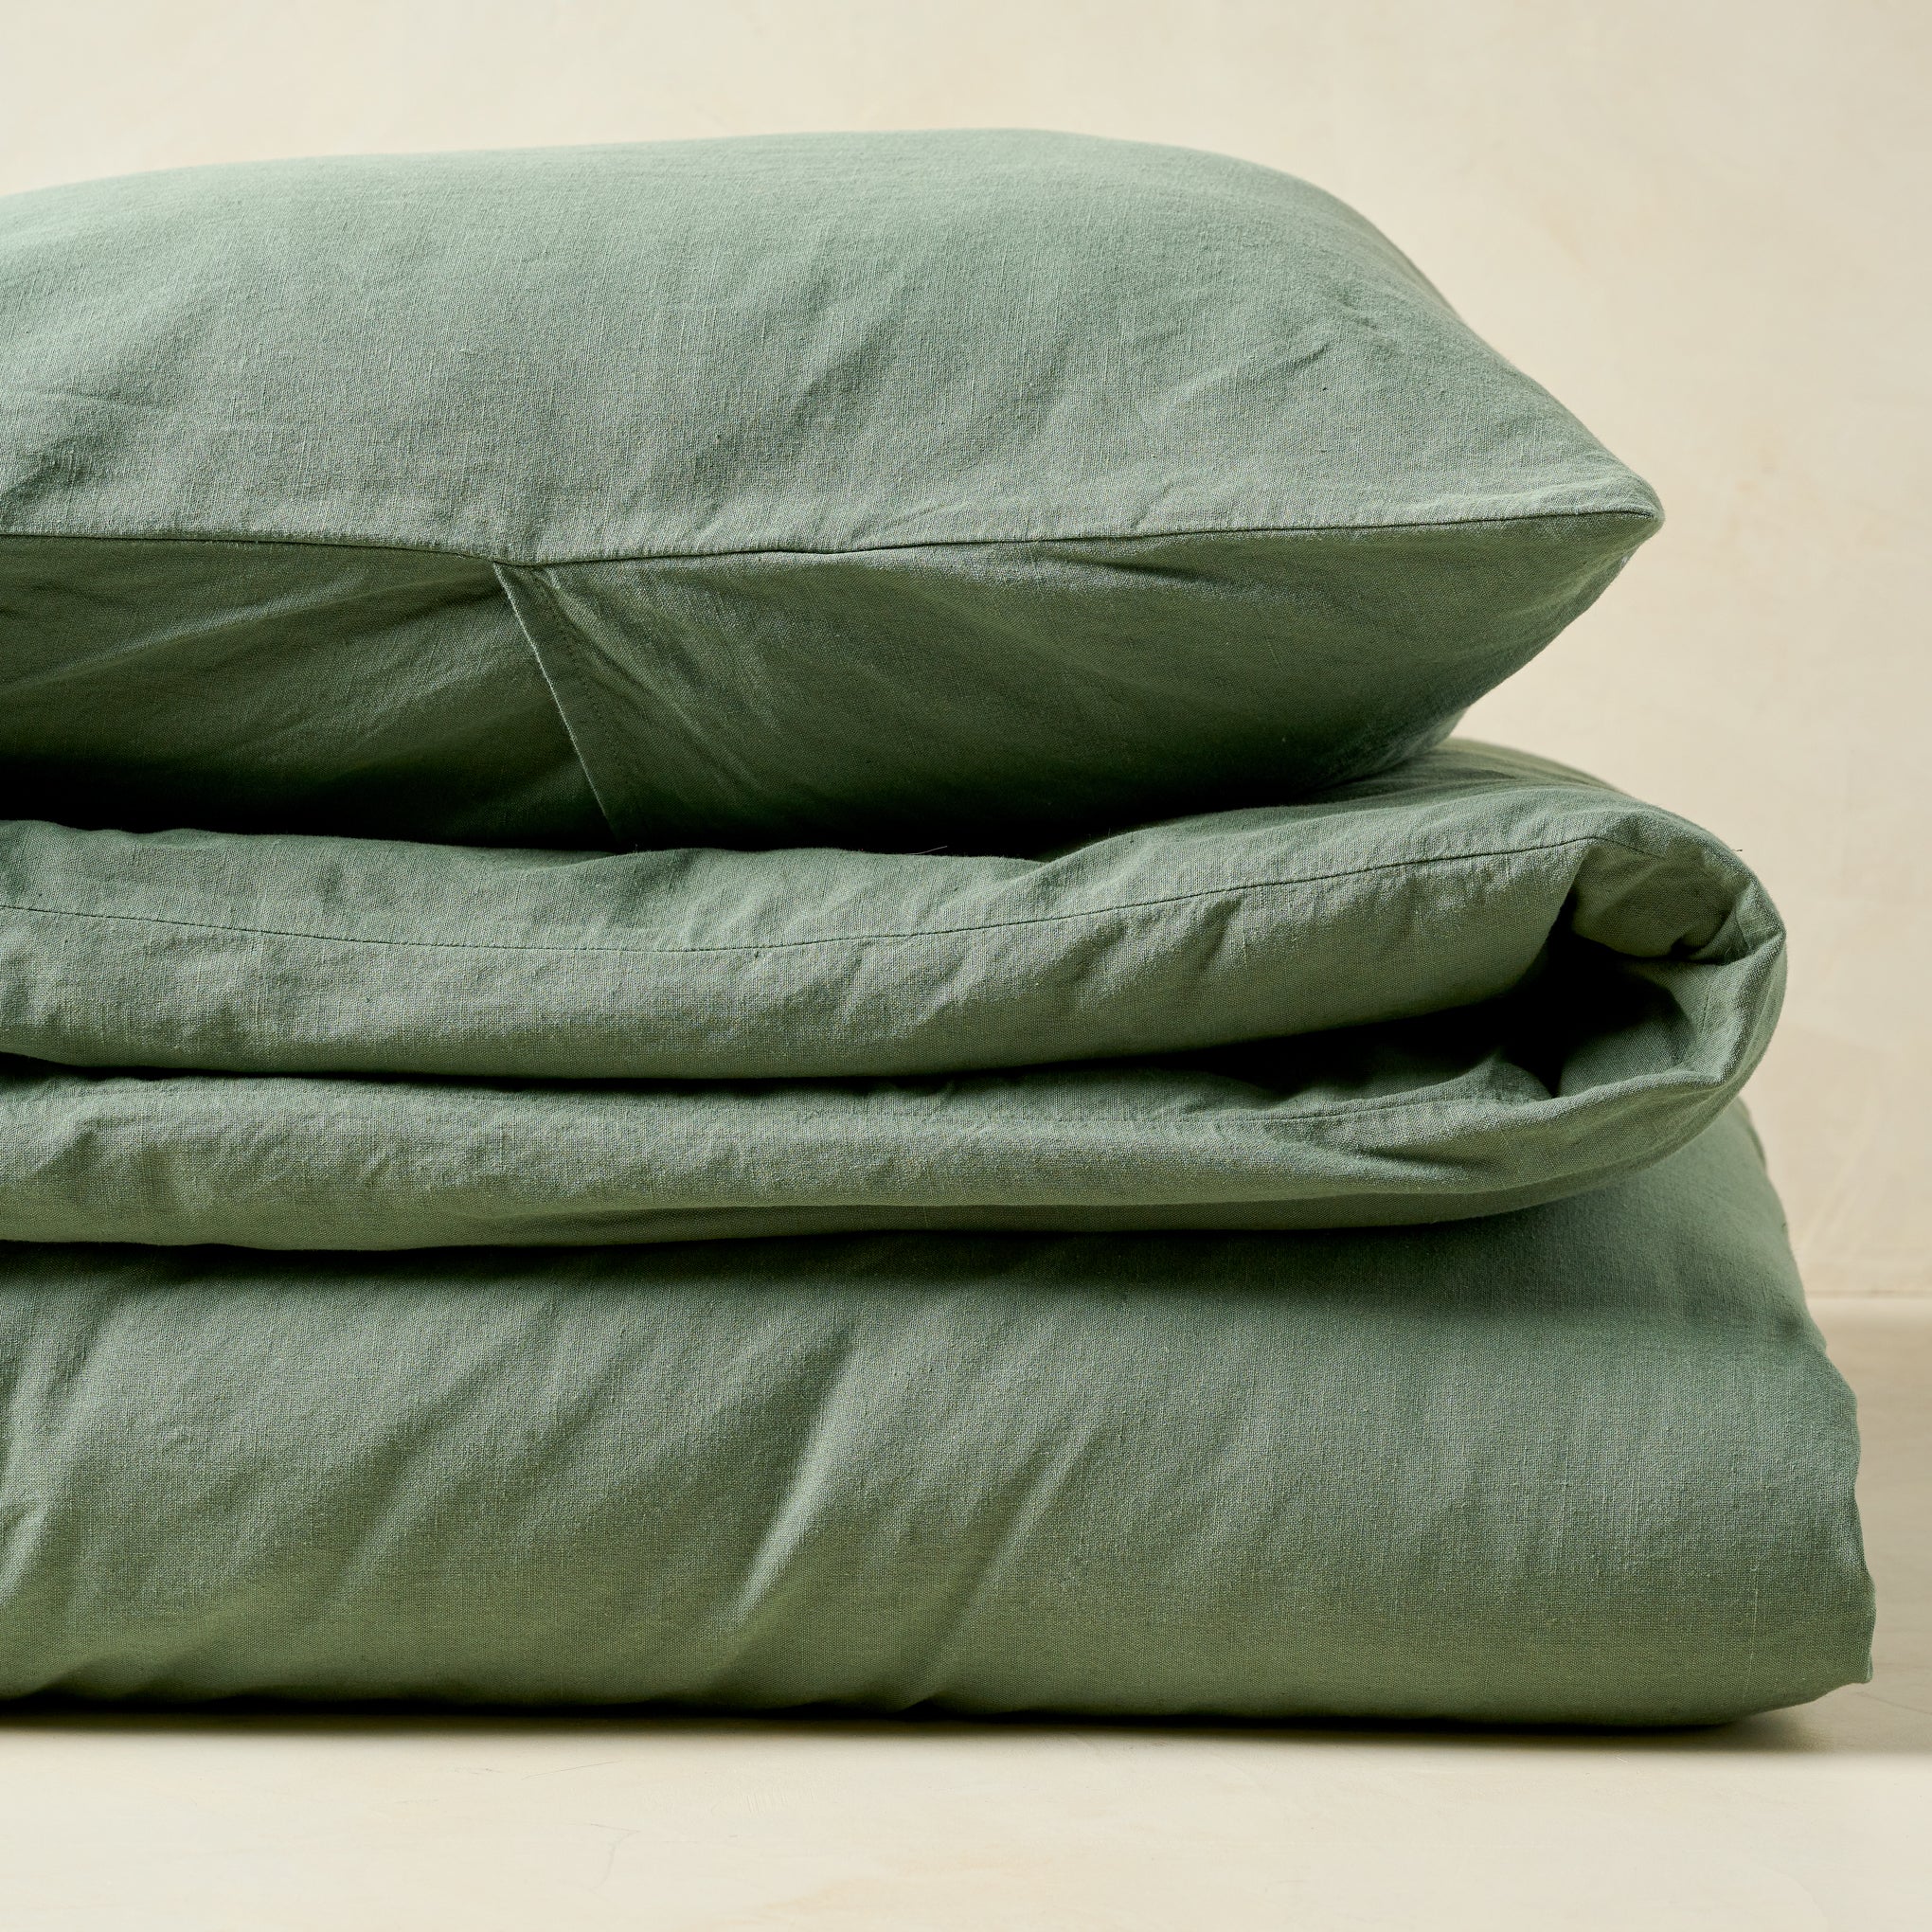 Dusty Green Linen Cotton Duvet Cover Items range from $159.00 to $169.00